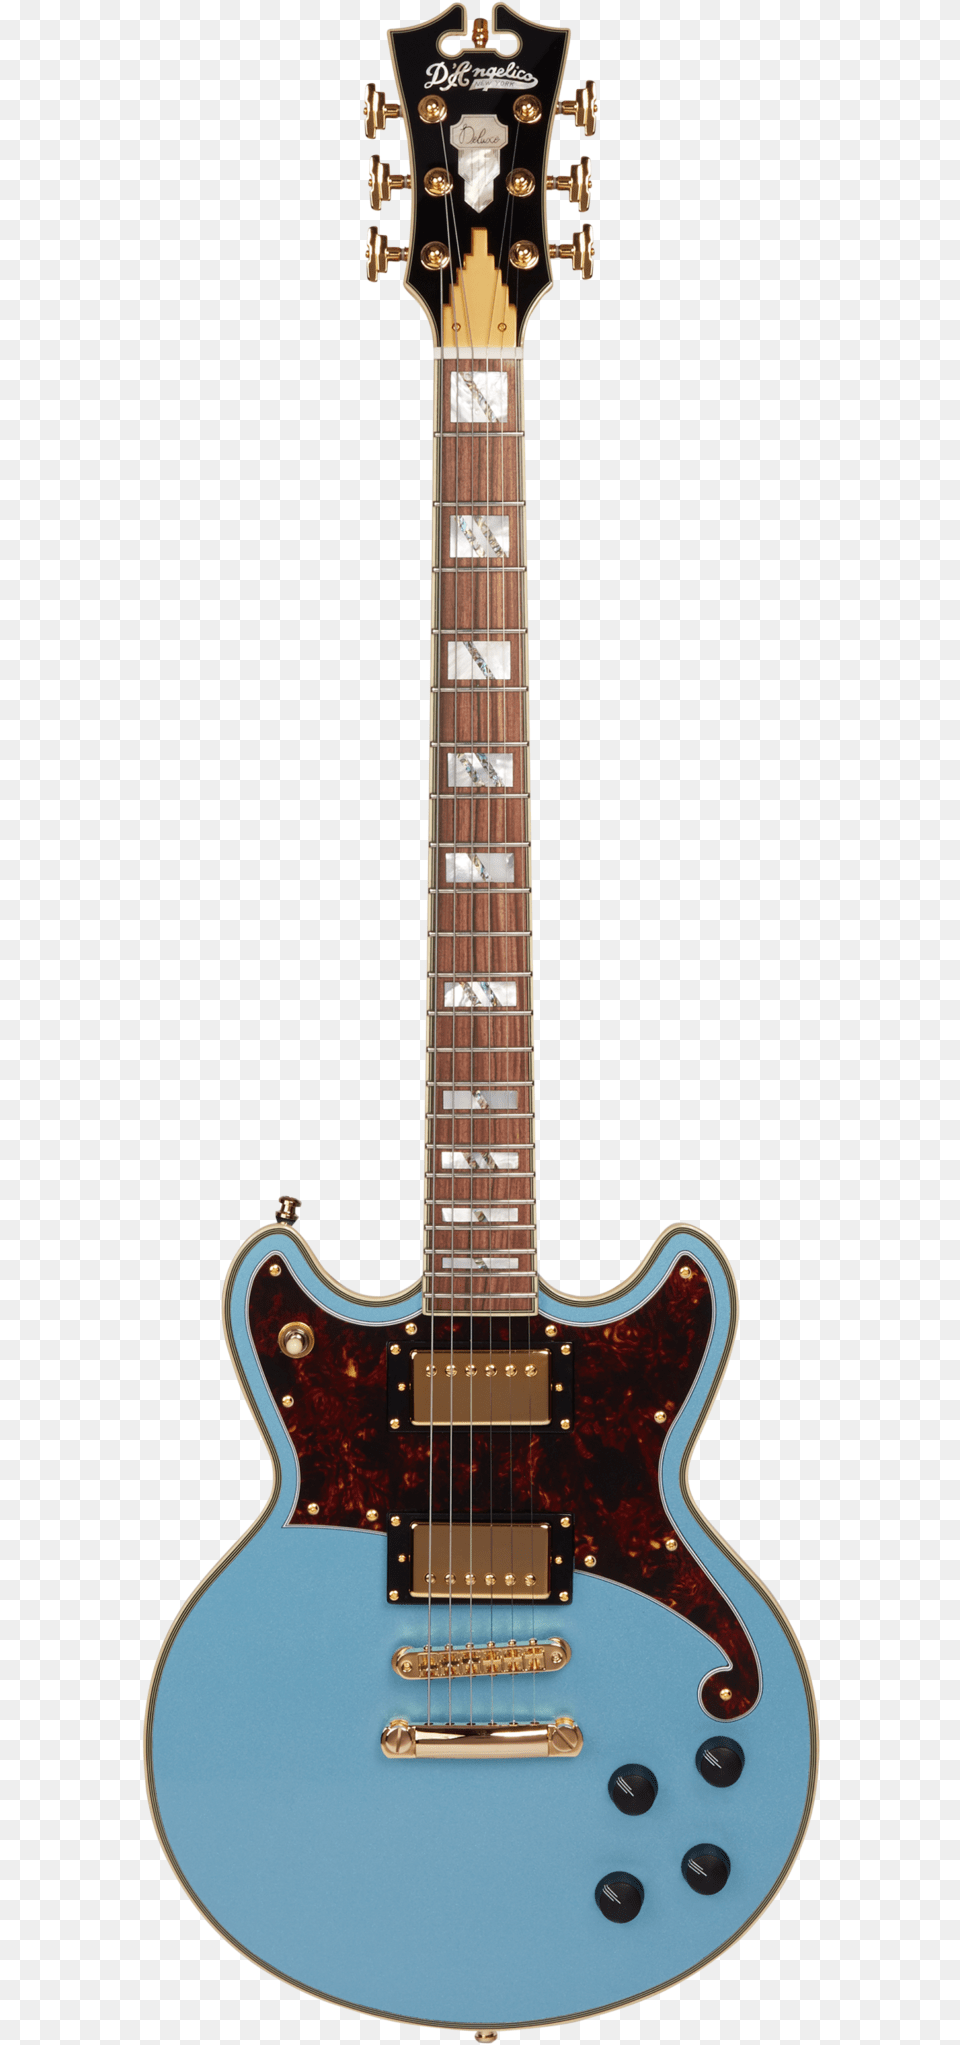 Eltricas Guitars D Angelico Deluxe Atlantic, Electric Guitar, Guitar, Musical Instrument Png Image